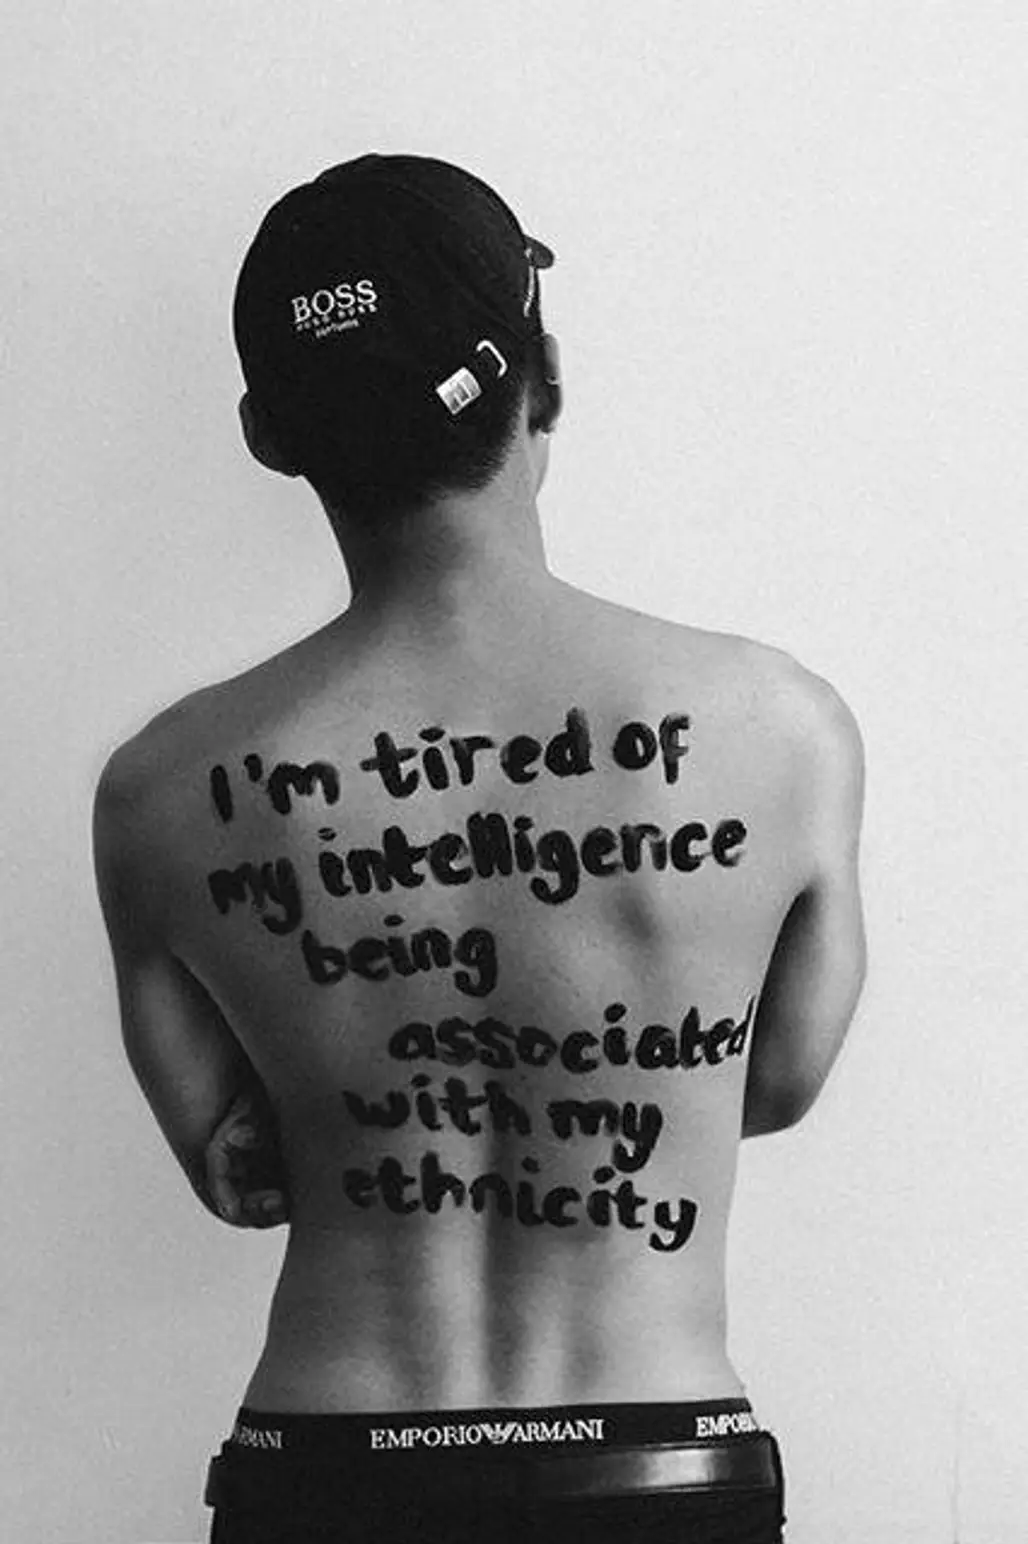 I'm Tired of My Intelligence Being Associated with My Ethnicity